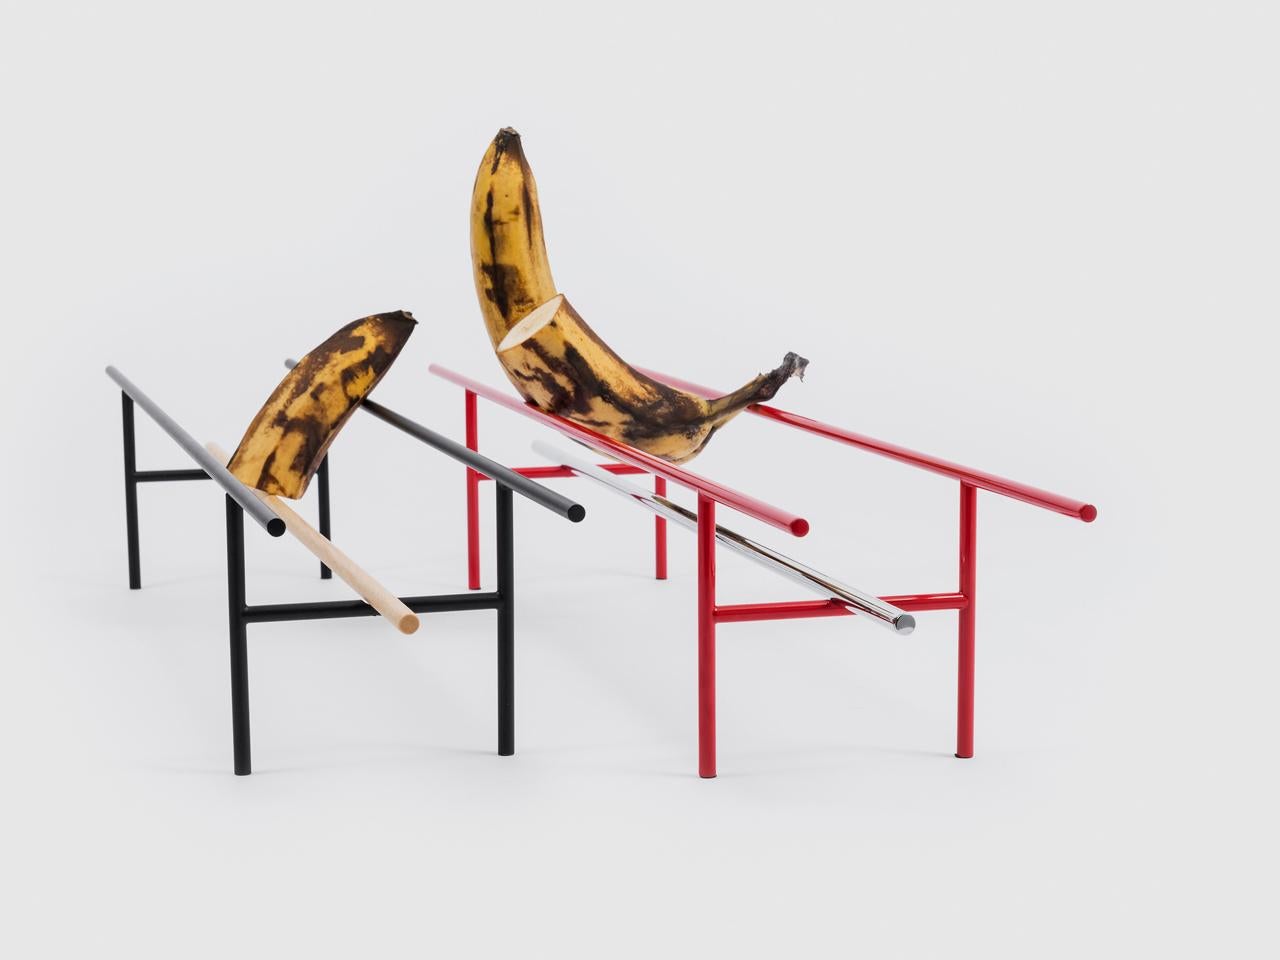 Fruit bowl no 5.5 can technically be described as a “container” thanks to just a few essential elements – three horizontal bars on two sets of legs. The idea is to hold the fruit in a seemingly unstable way, showing the precariousness of